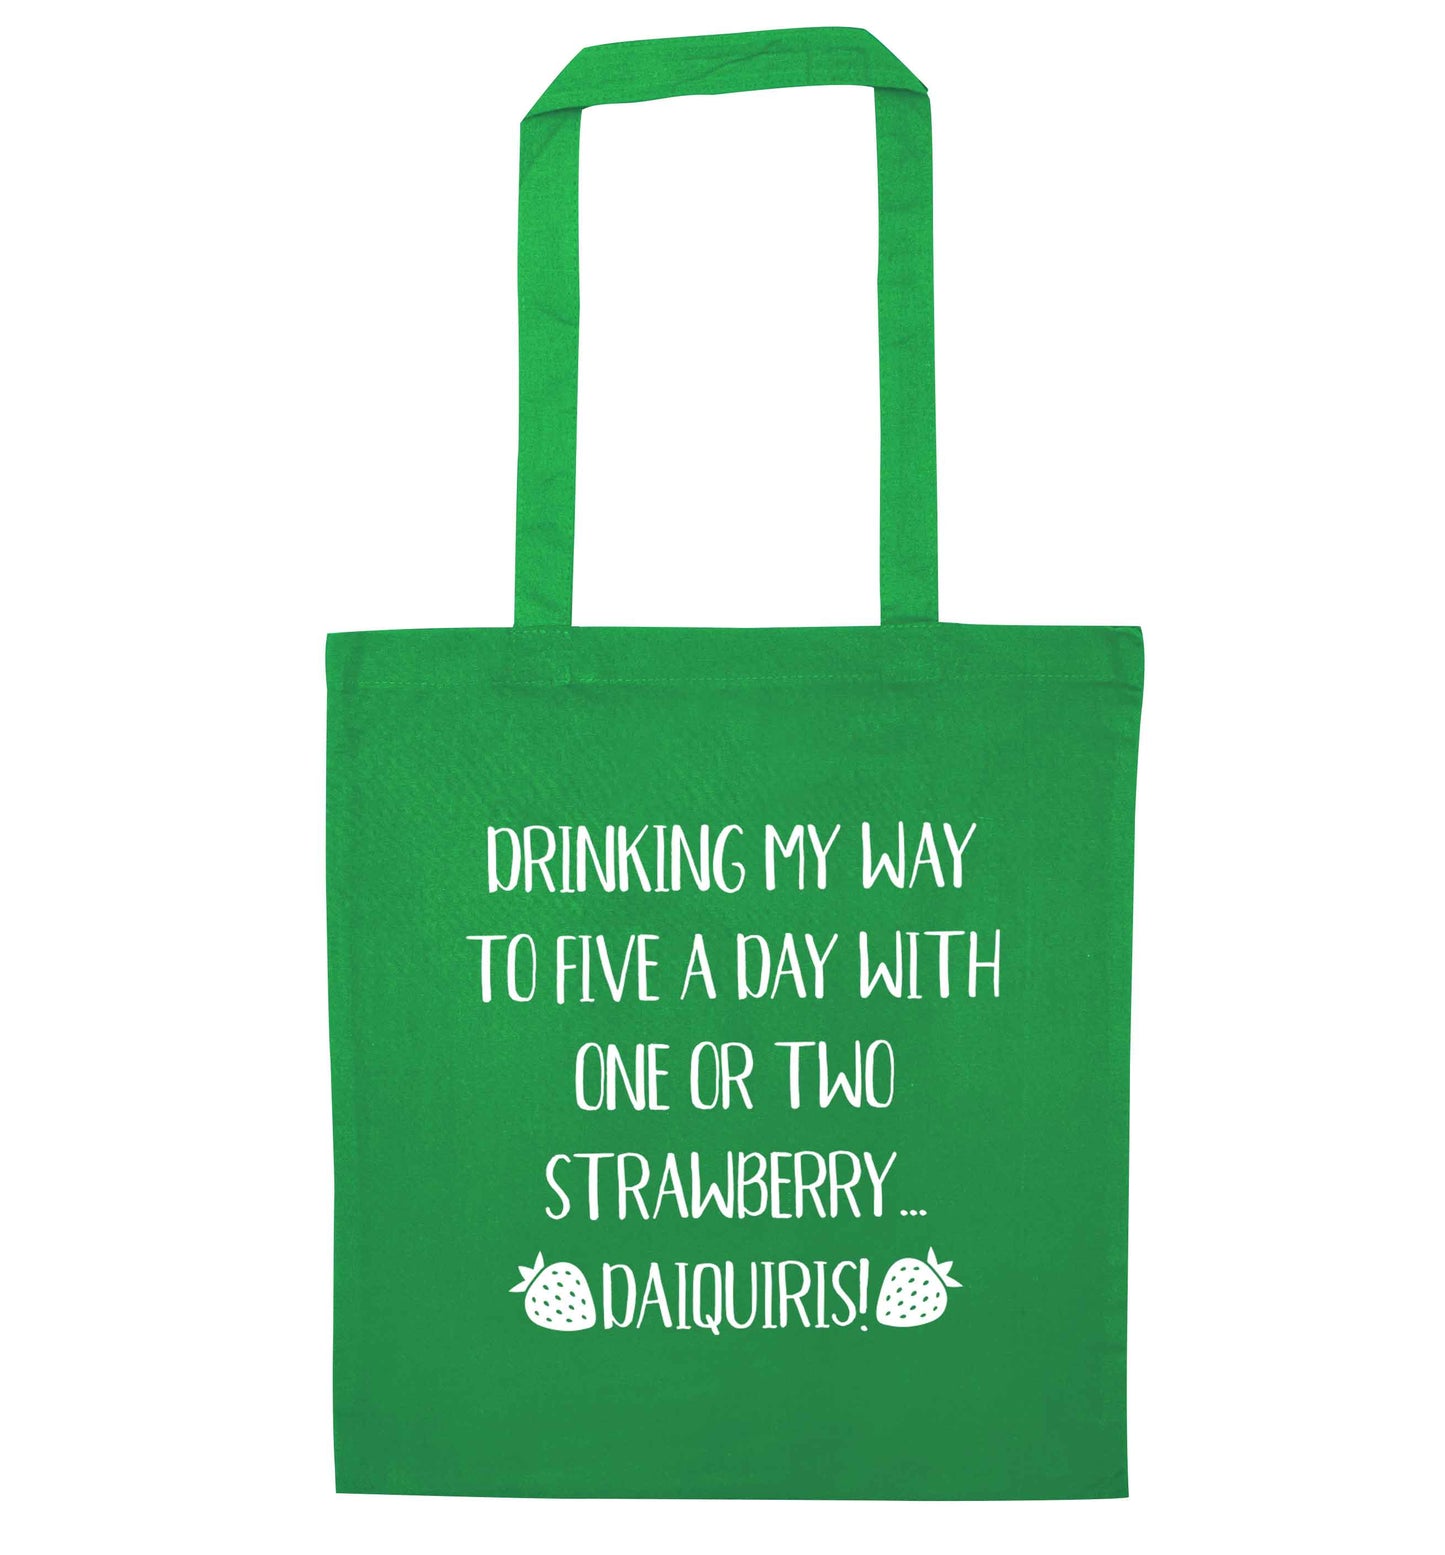 Drinking my way to five a day with one or two straberry daiquiris green tote bag